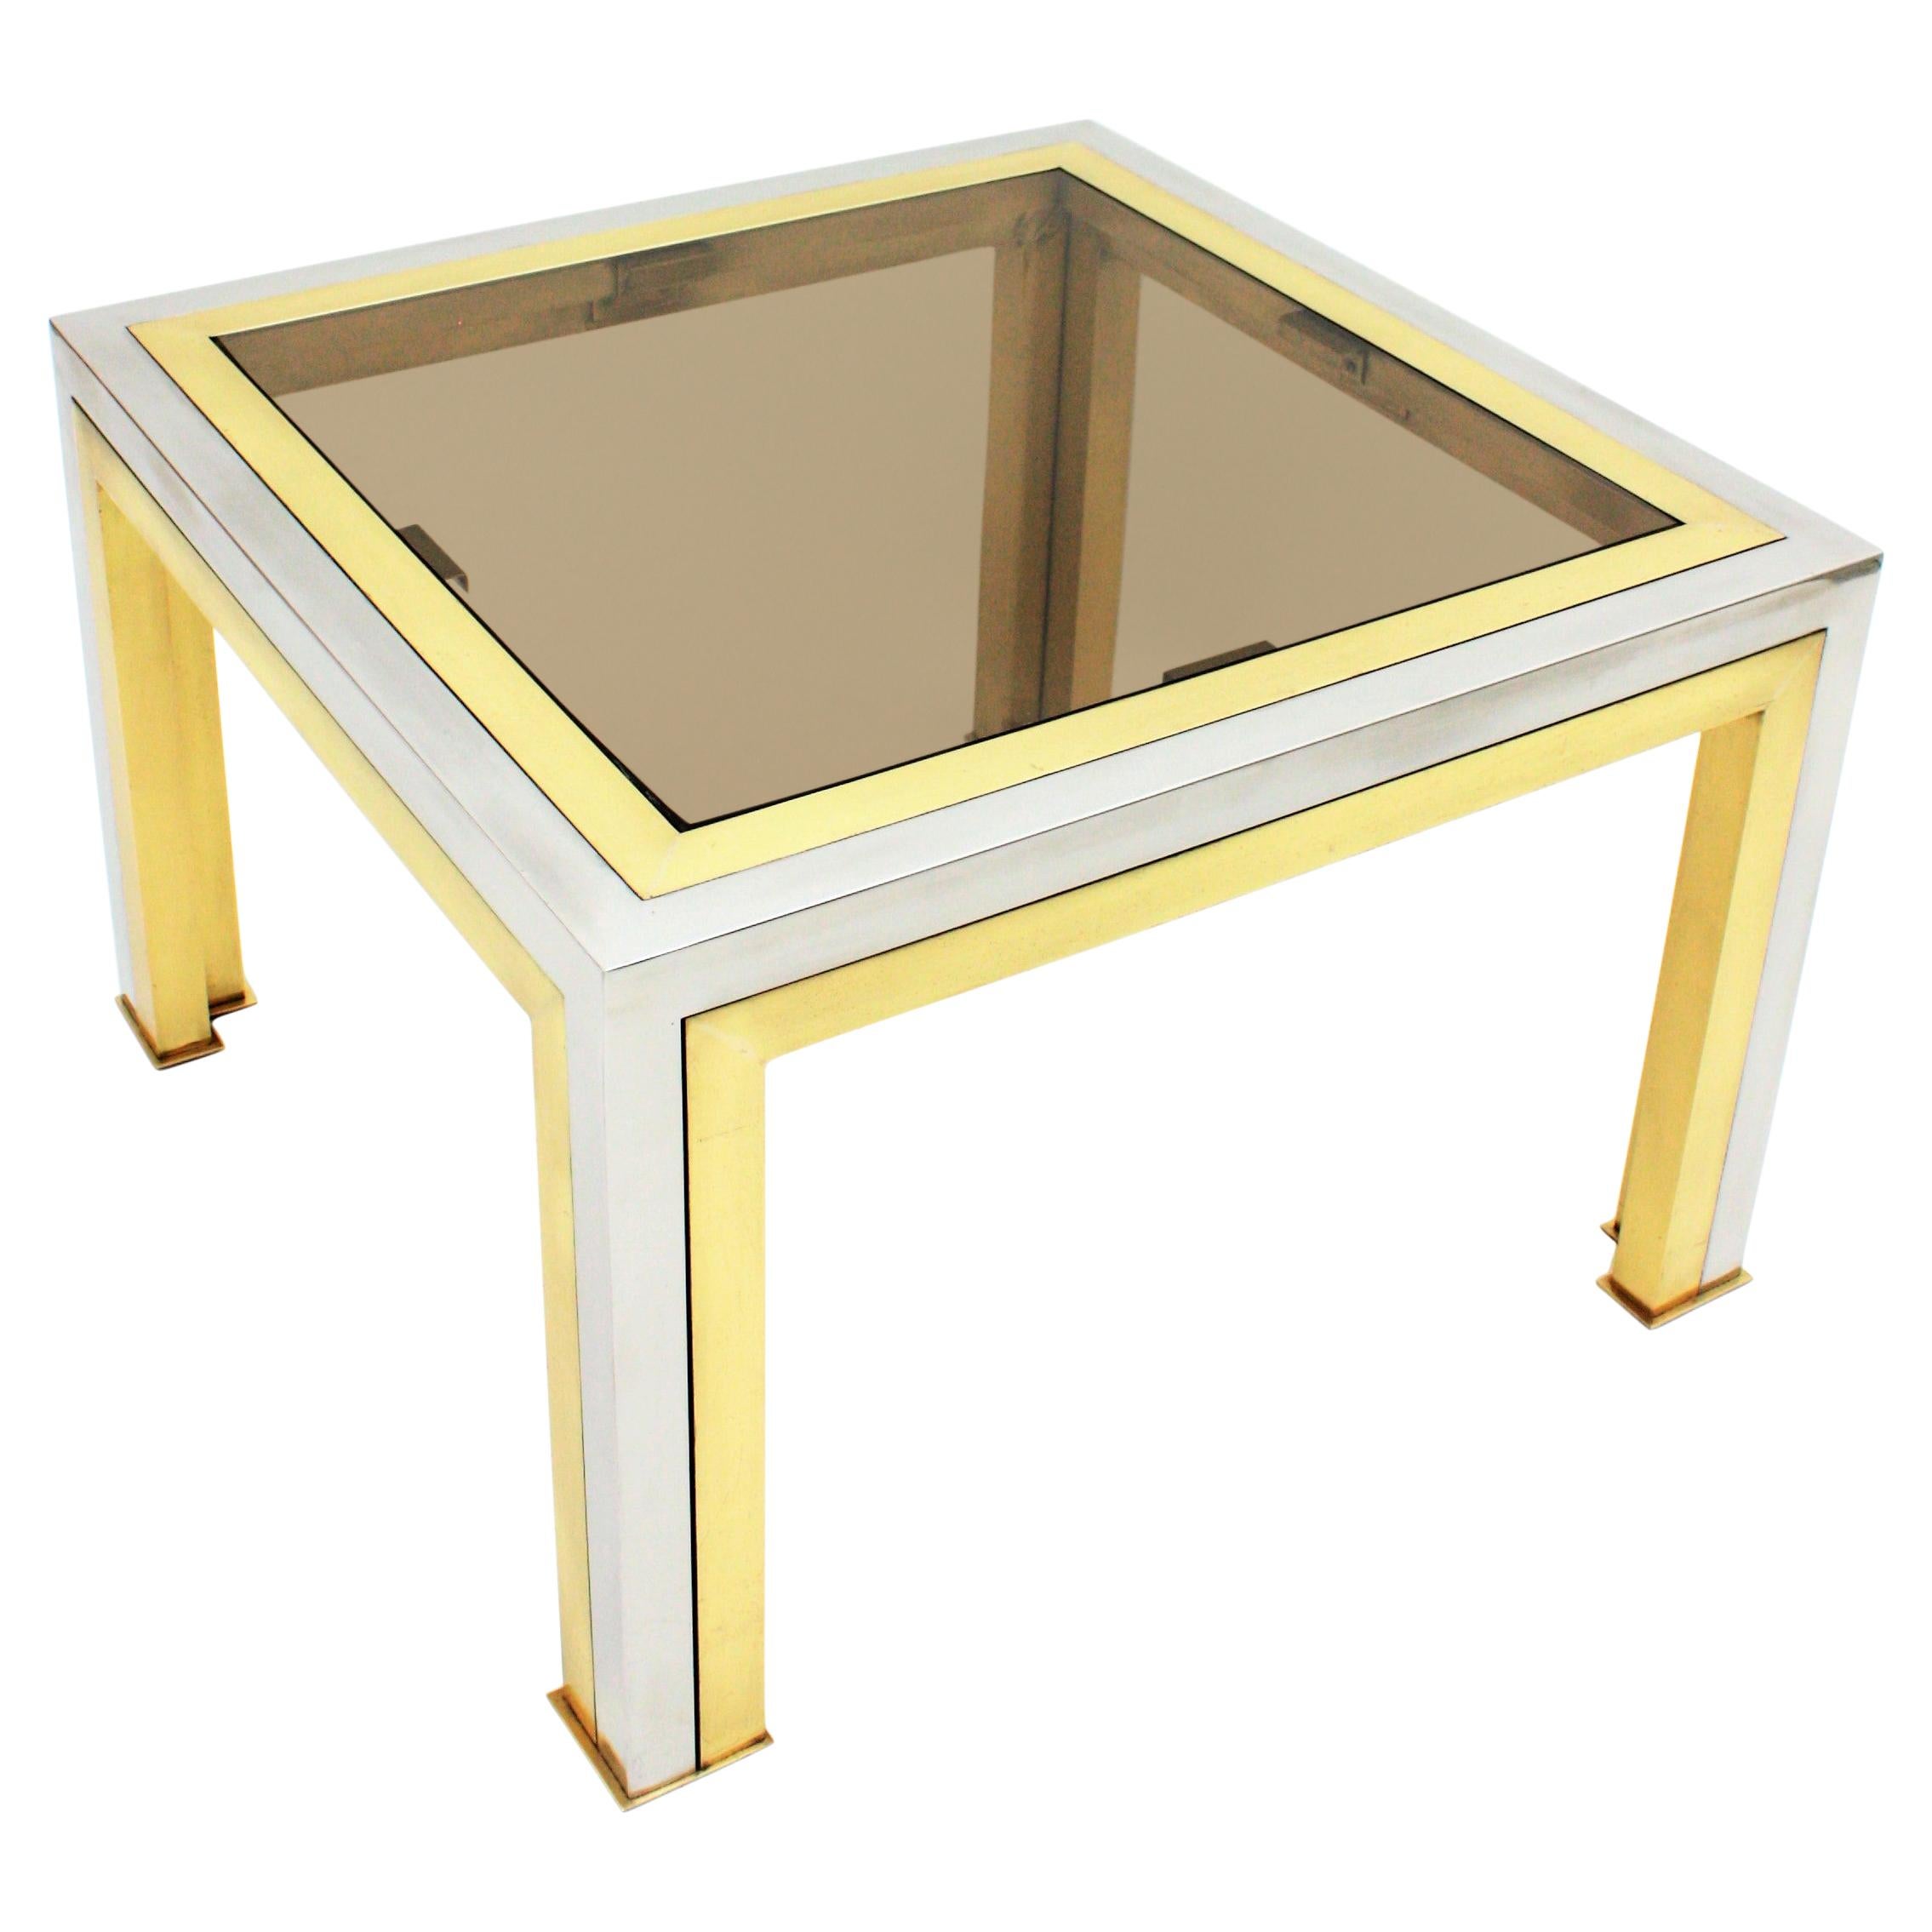 Romeo Rega Coffee Table in Brass, Chromed Steel and Glass